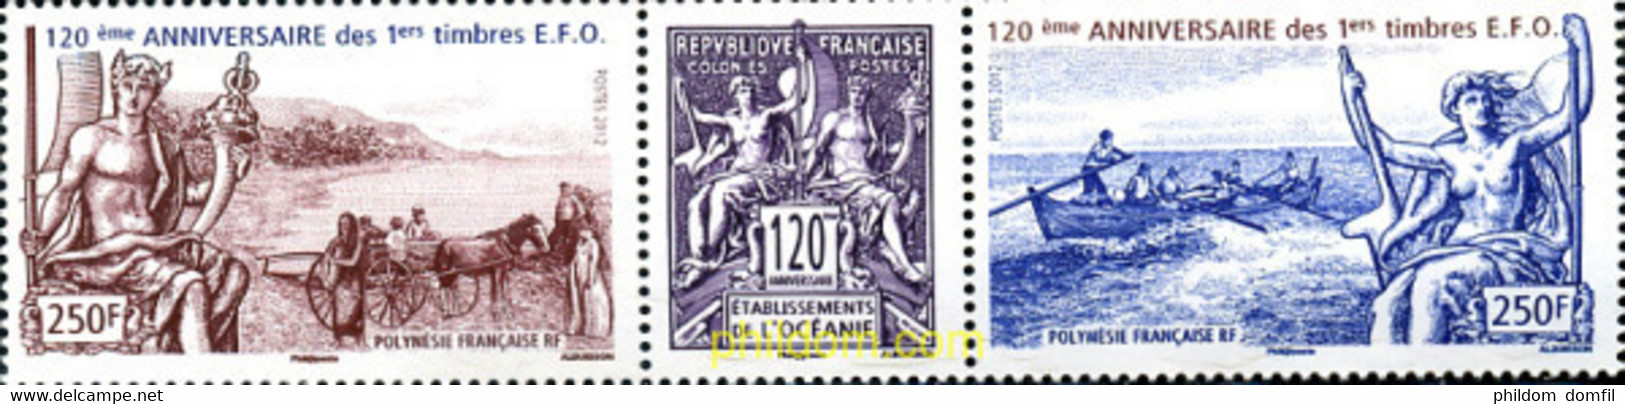 295887 MNH POLINESIA FRANCESA 2012 - Used Stamps